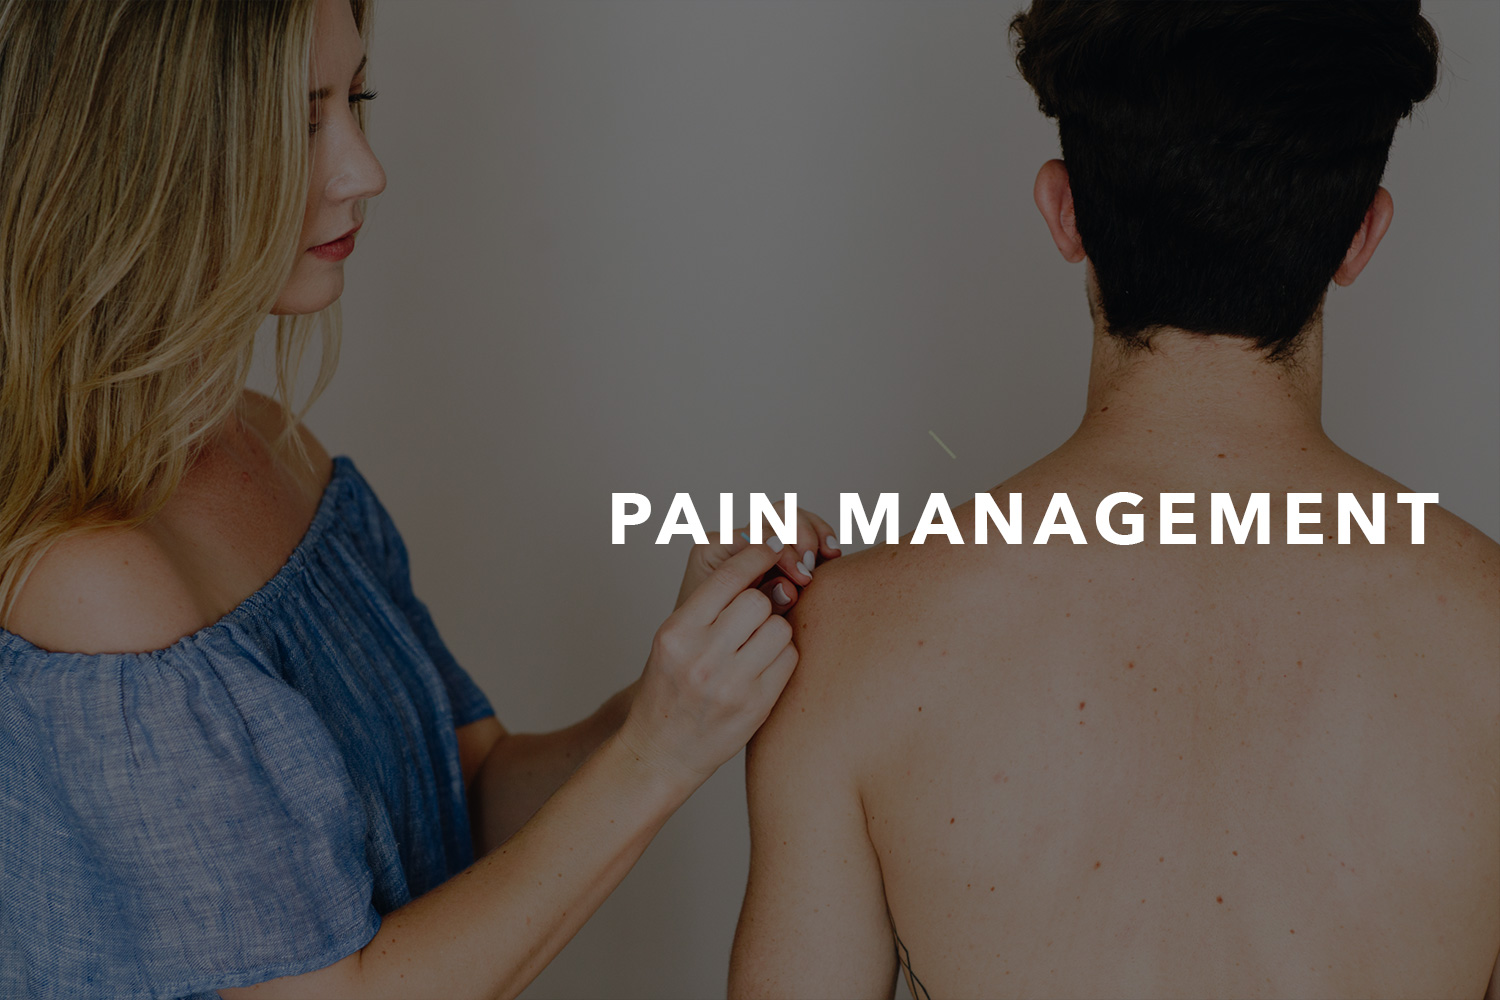 Acupuncture for Pain